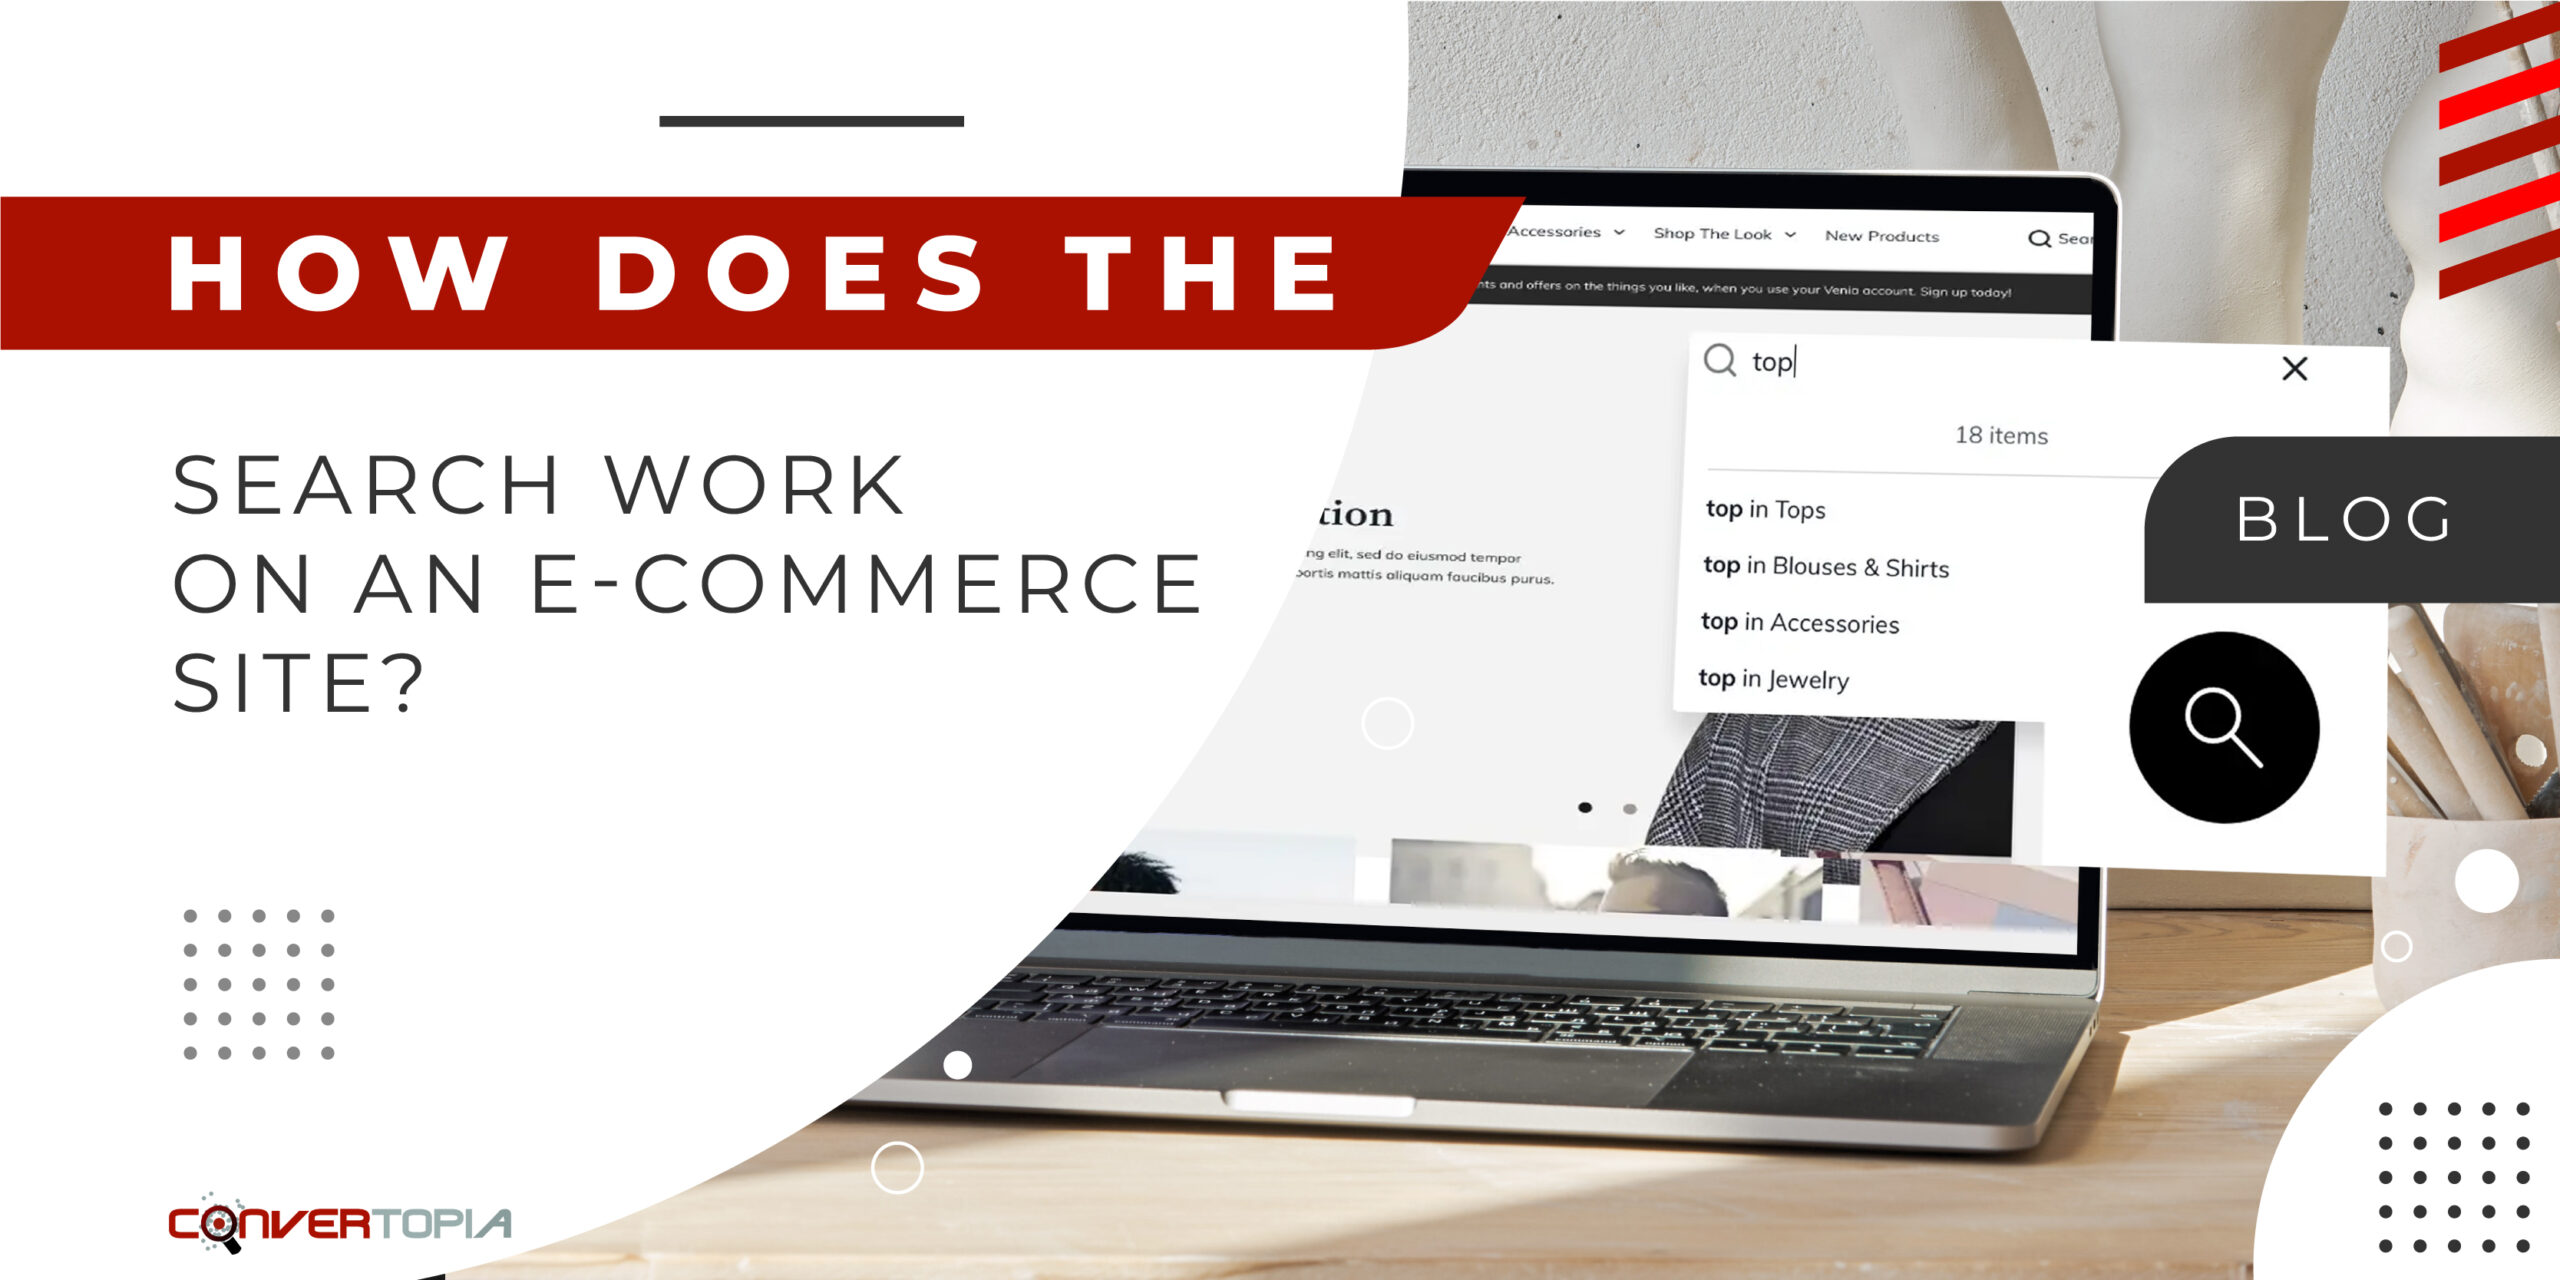 How does the search work on an e-commerce site?